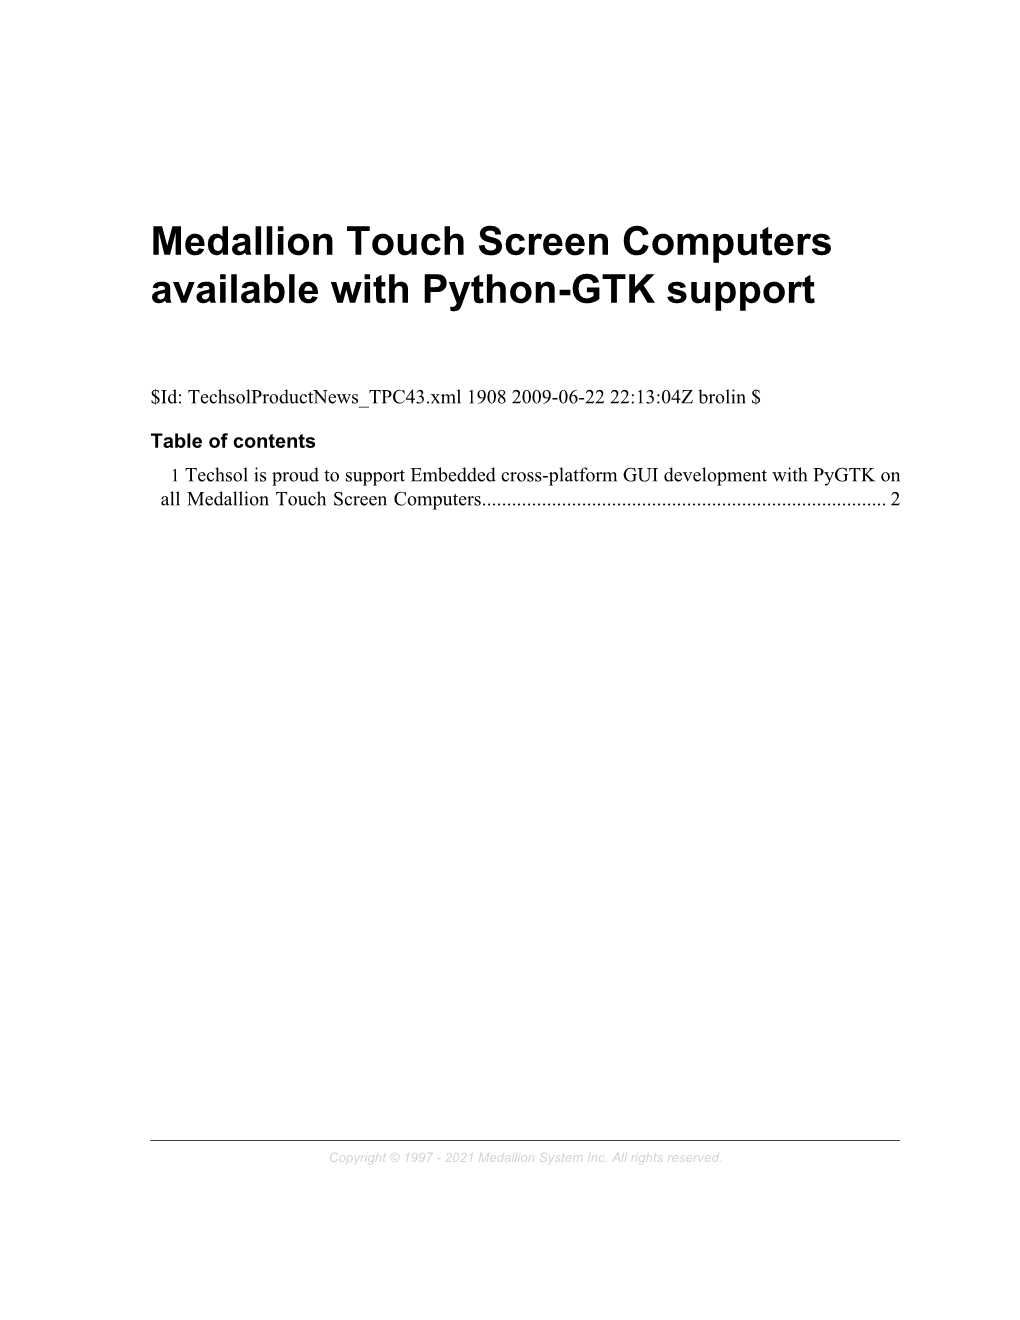 Medallion Touch Screen Computers Available with Python-GTK Support